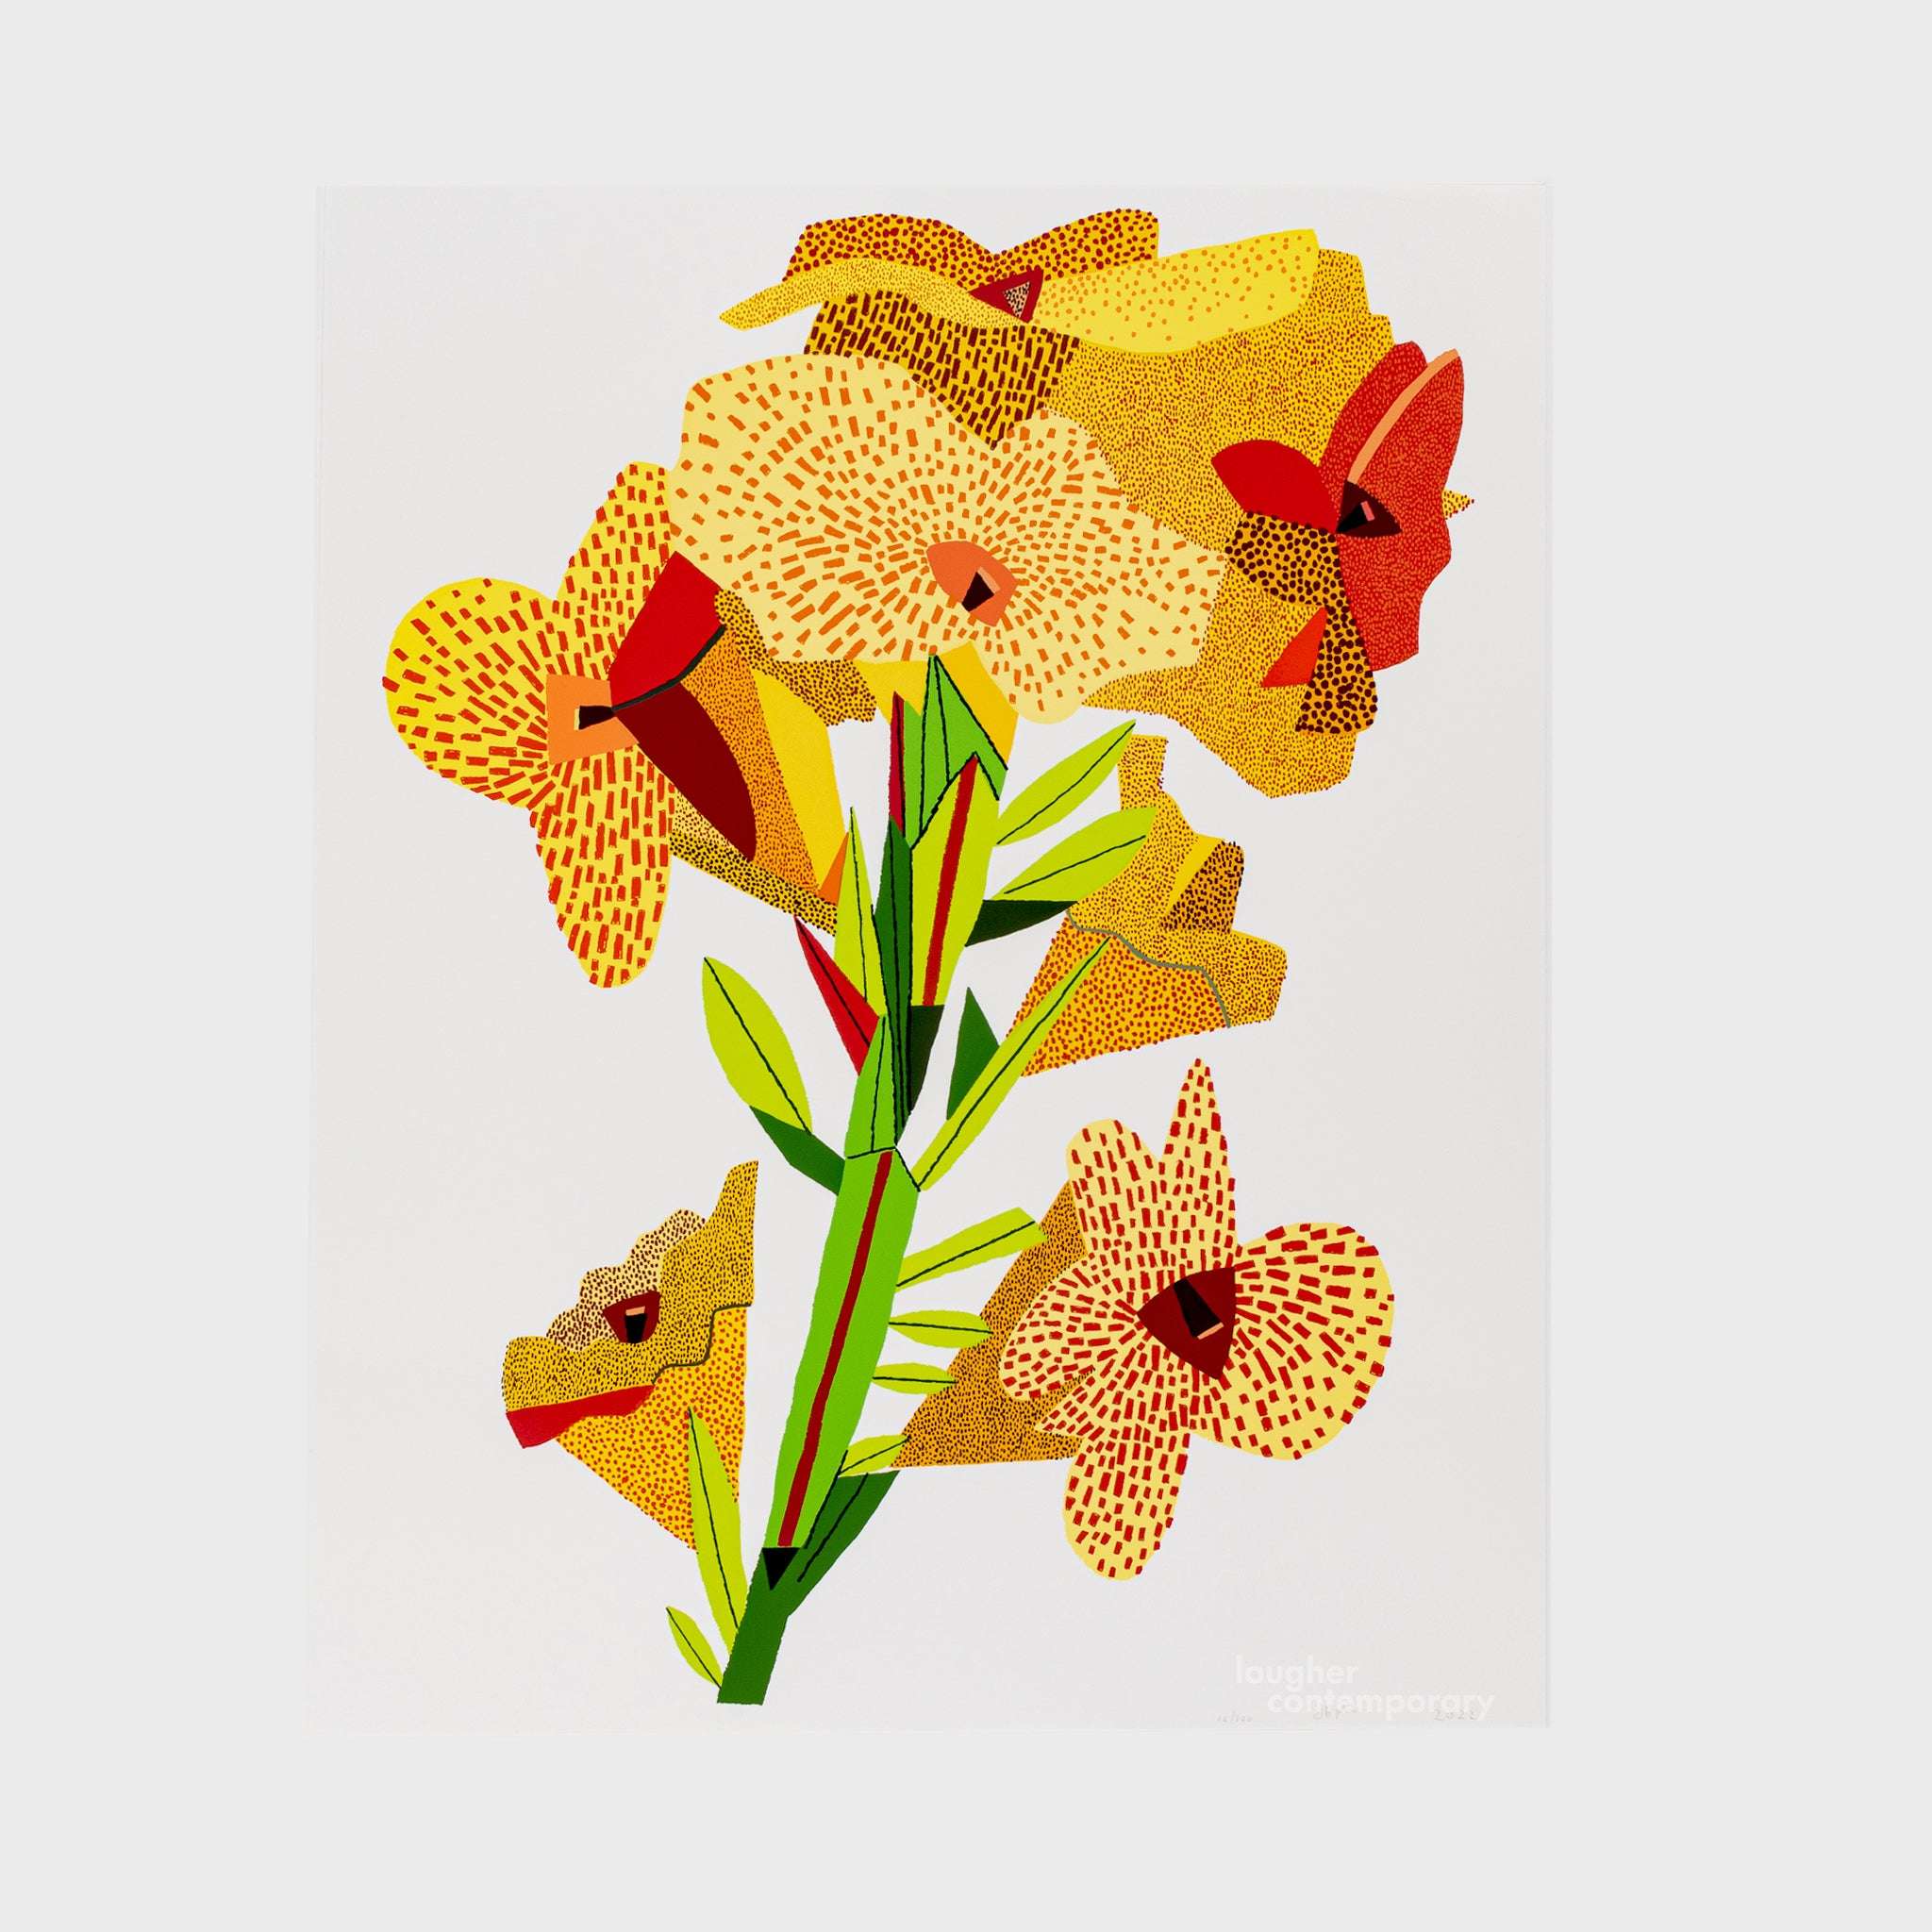 Jonas Wood, Yellow Flower, 2022 For Sale - Lougher Contemporary